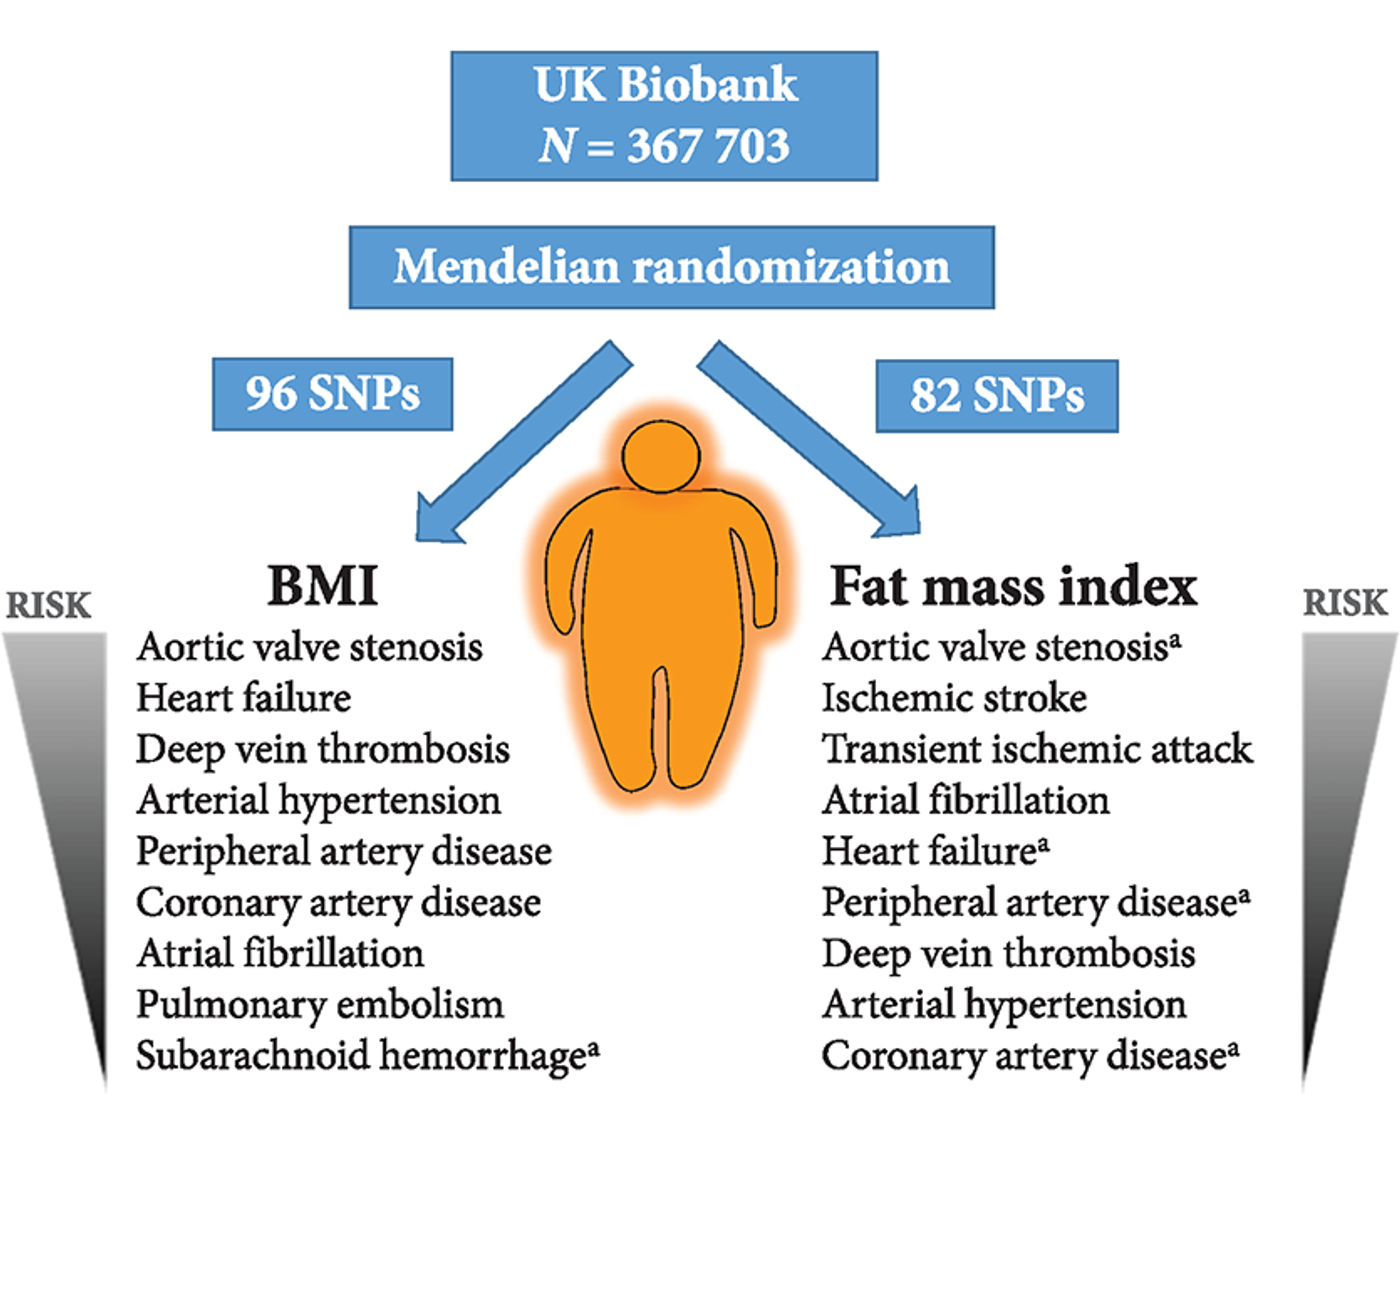 Image via European Heart Journal: Observed associations of BMI and fat mass index with cardiovascular conditions in UK Biobank. aSignificant association at the P < 0.05 level; all other associations are significant at a Bonferroni threshold of P < 3.6 × 10−3 (corrected for 14 outcomes).